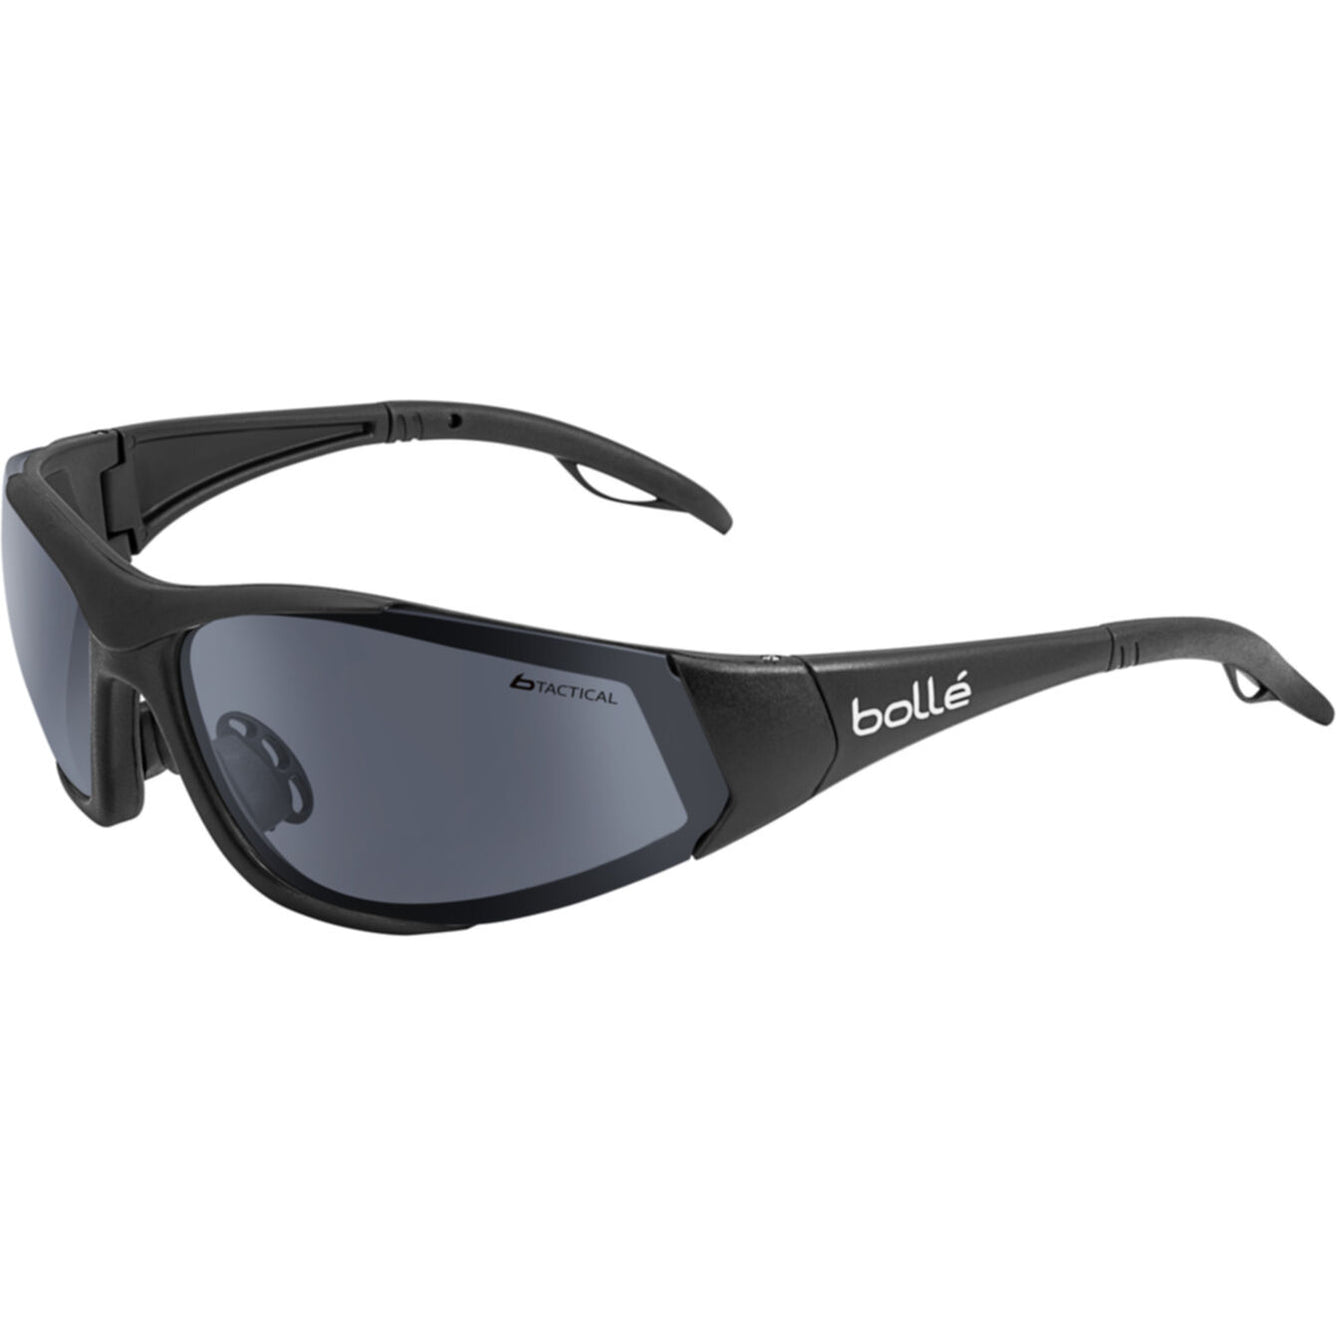 Bolle Safety - ROGUE - Ballistic glasses kit - 40136